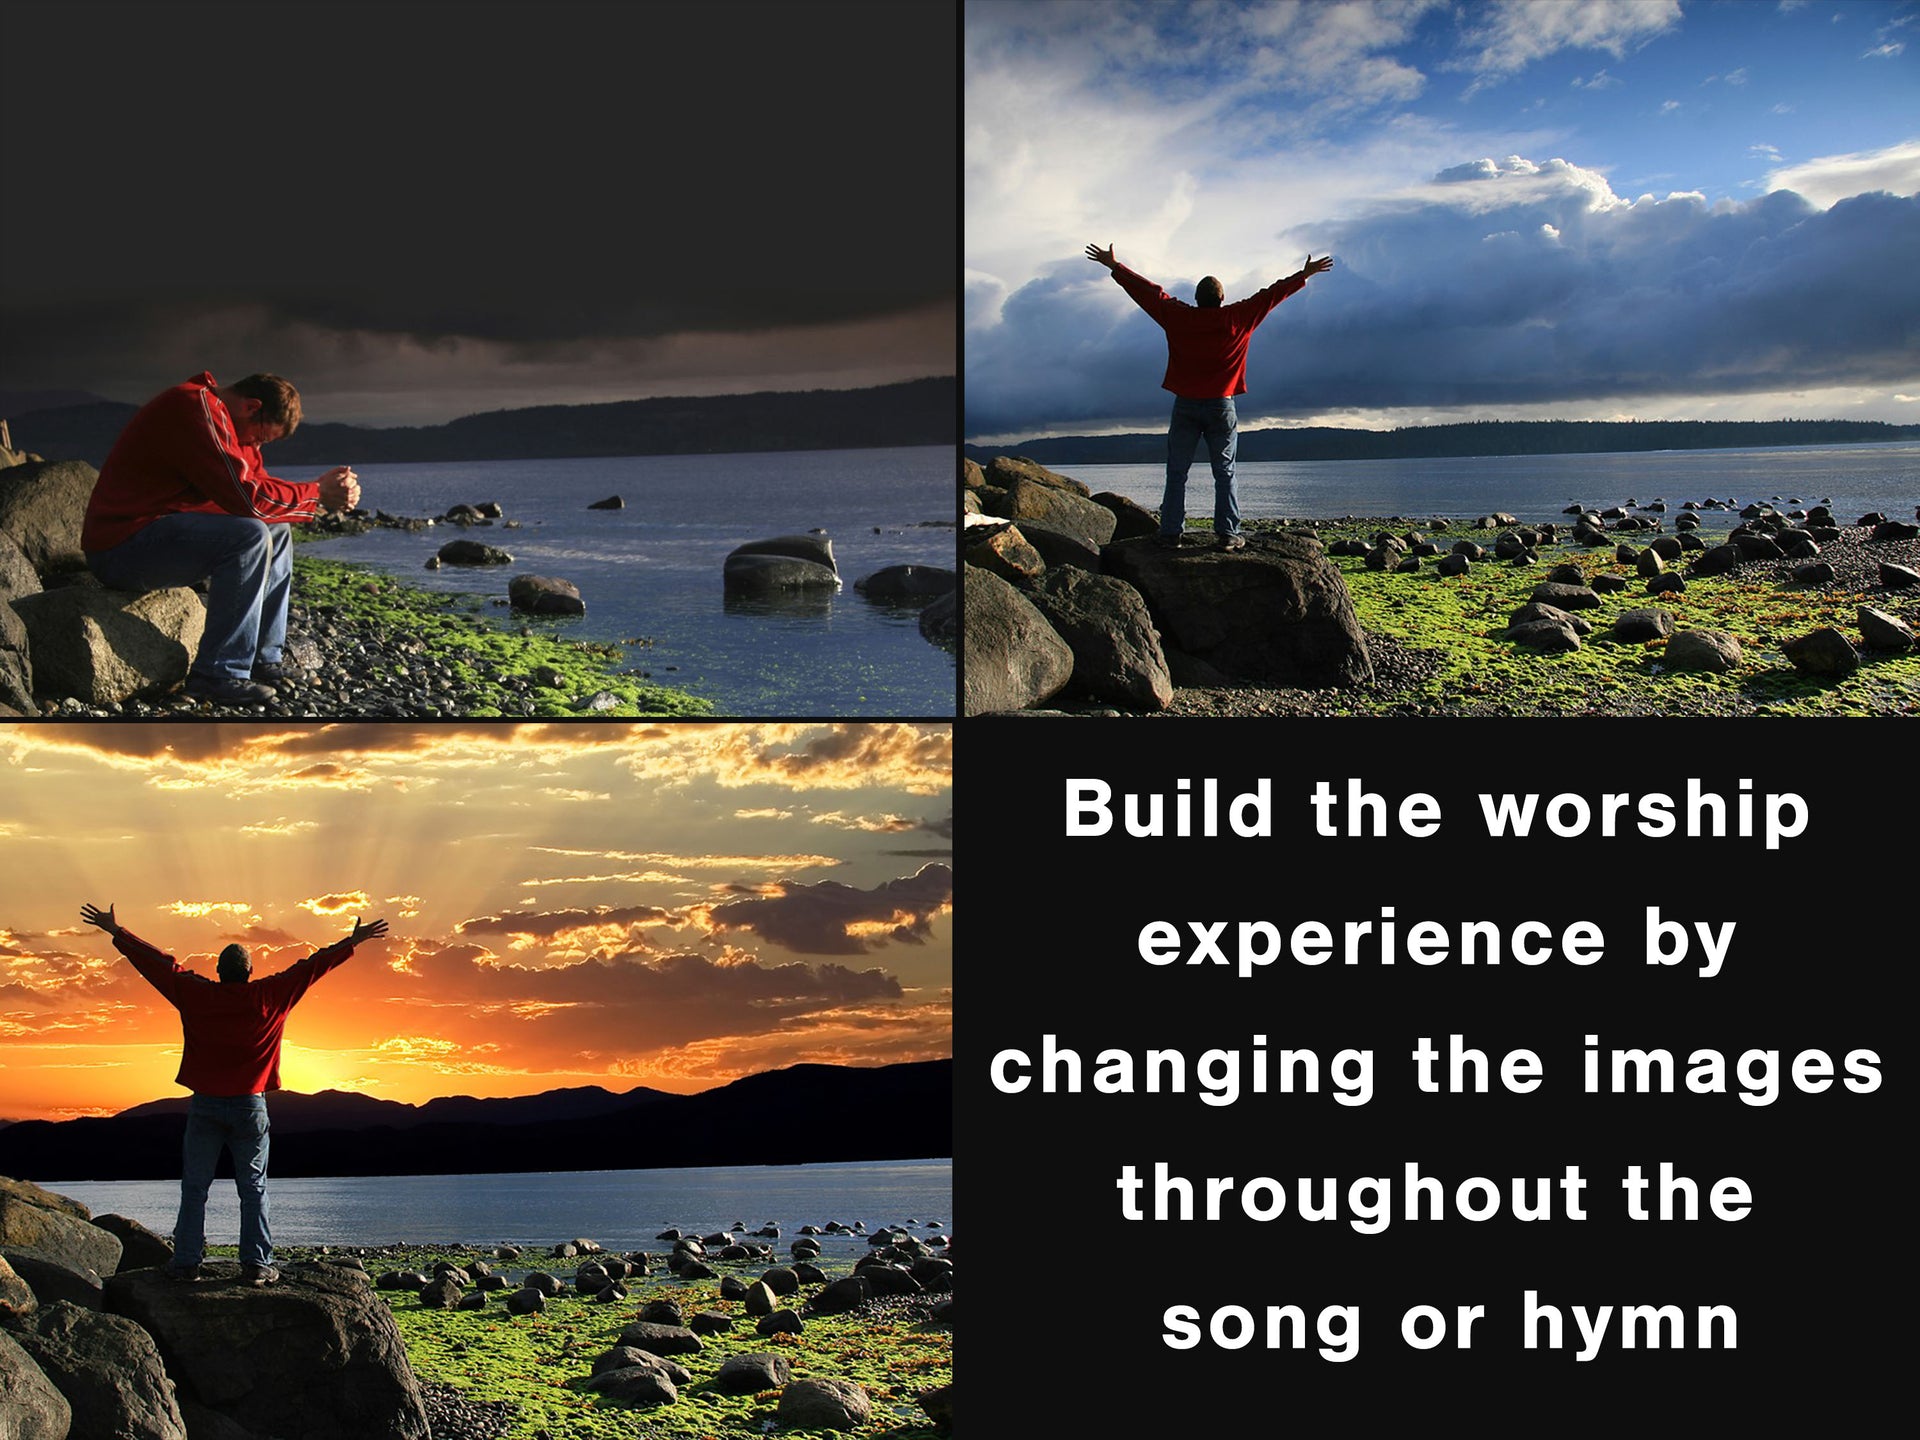 See How to Build the Worship Experience By Using More Than One Image in a Song or Hymn